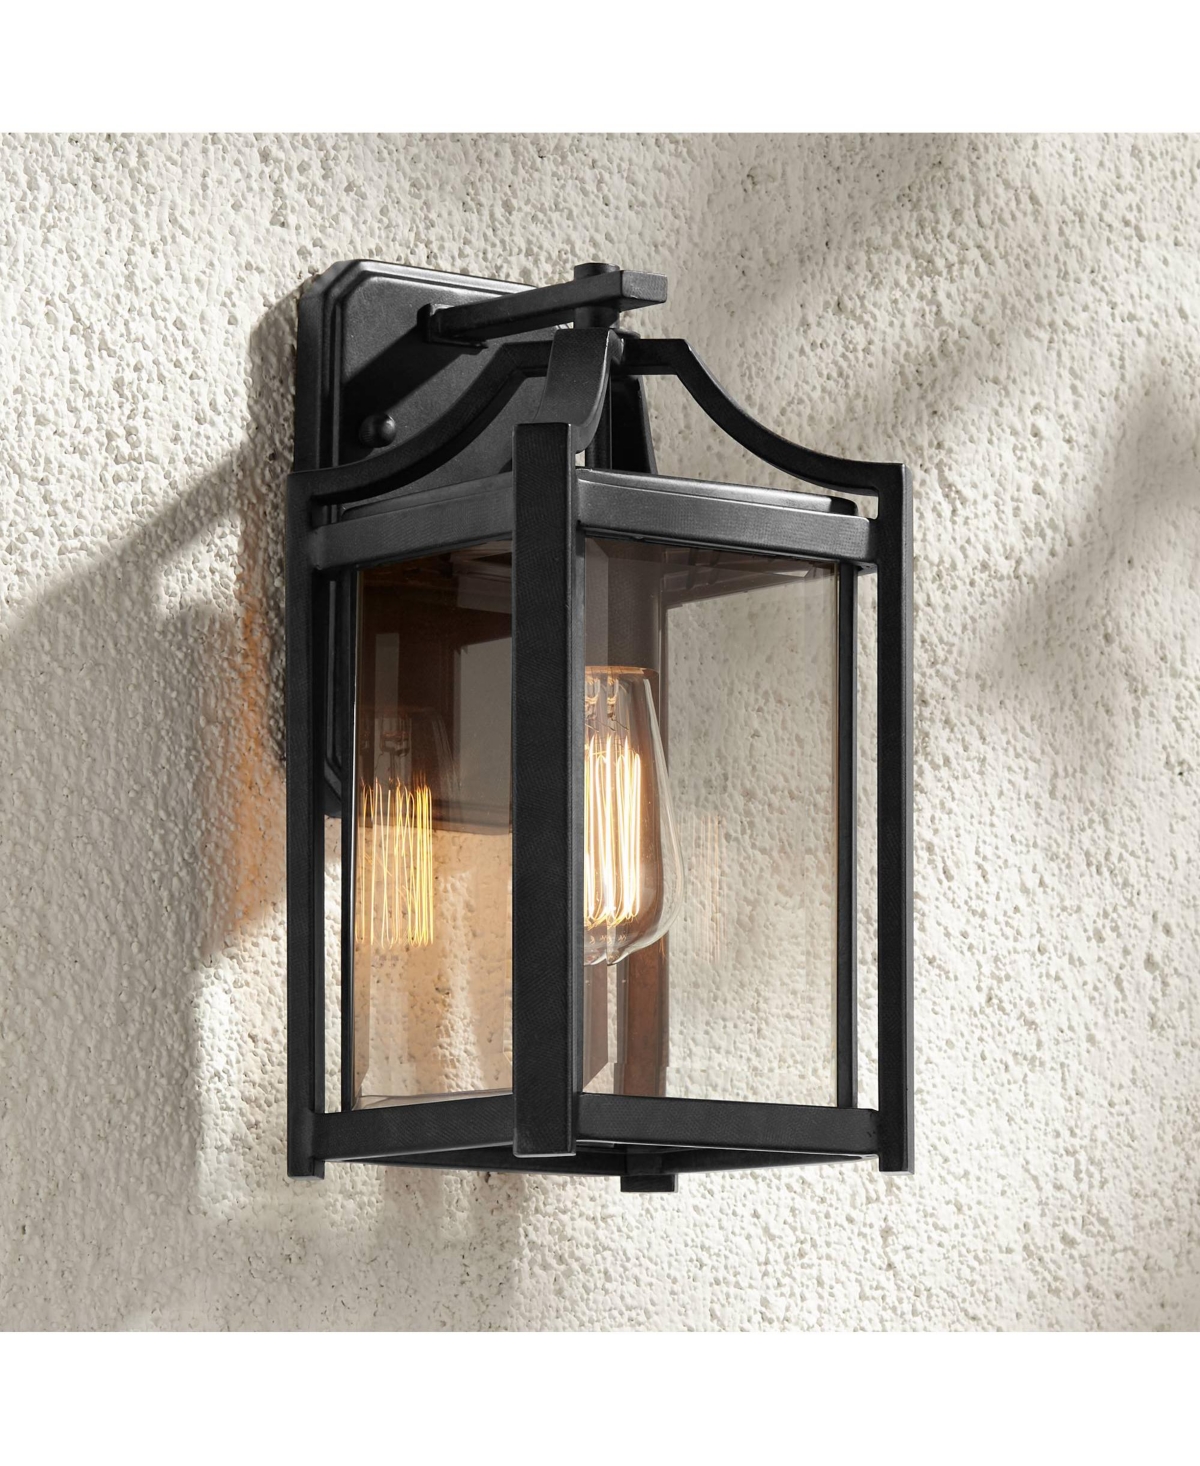 Rockford Farmhouse Rustic Outdoor Wall Light Fixture Bronze Iron 12 1/2" Clear Beveled Glass Panel for Exterior House Porch Patio Outside Deck Garage